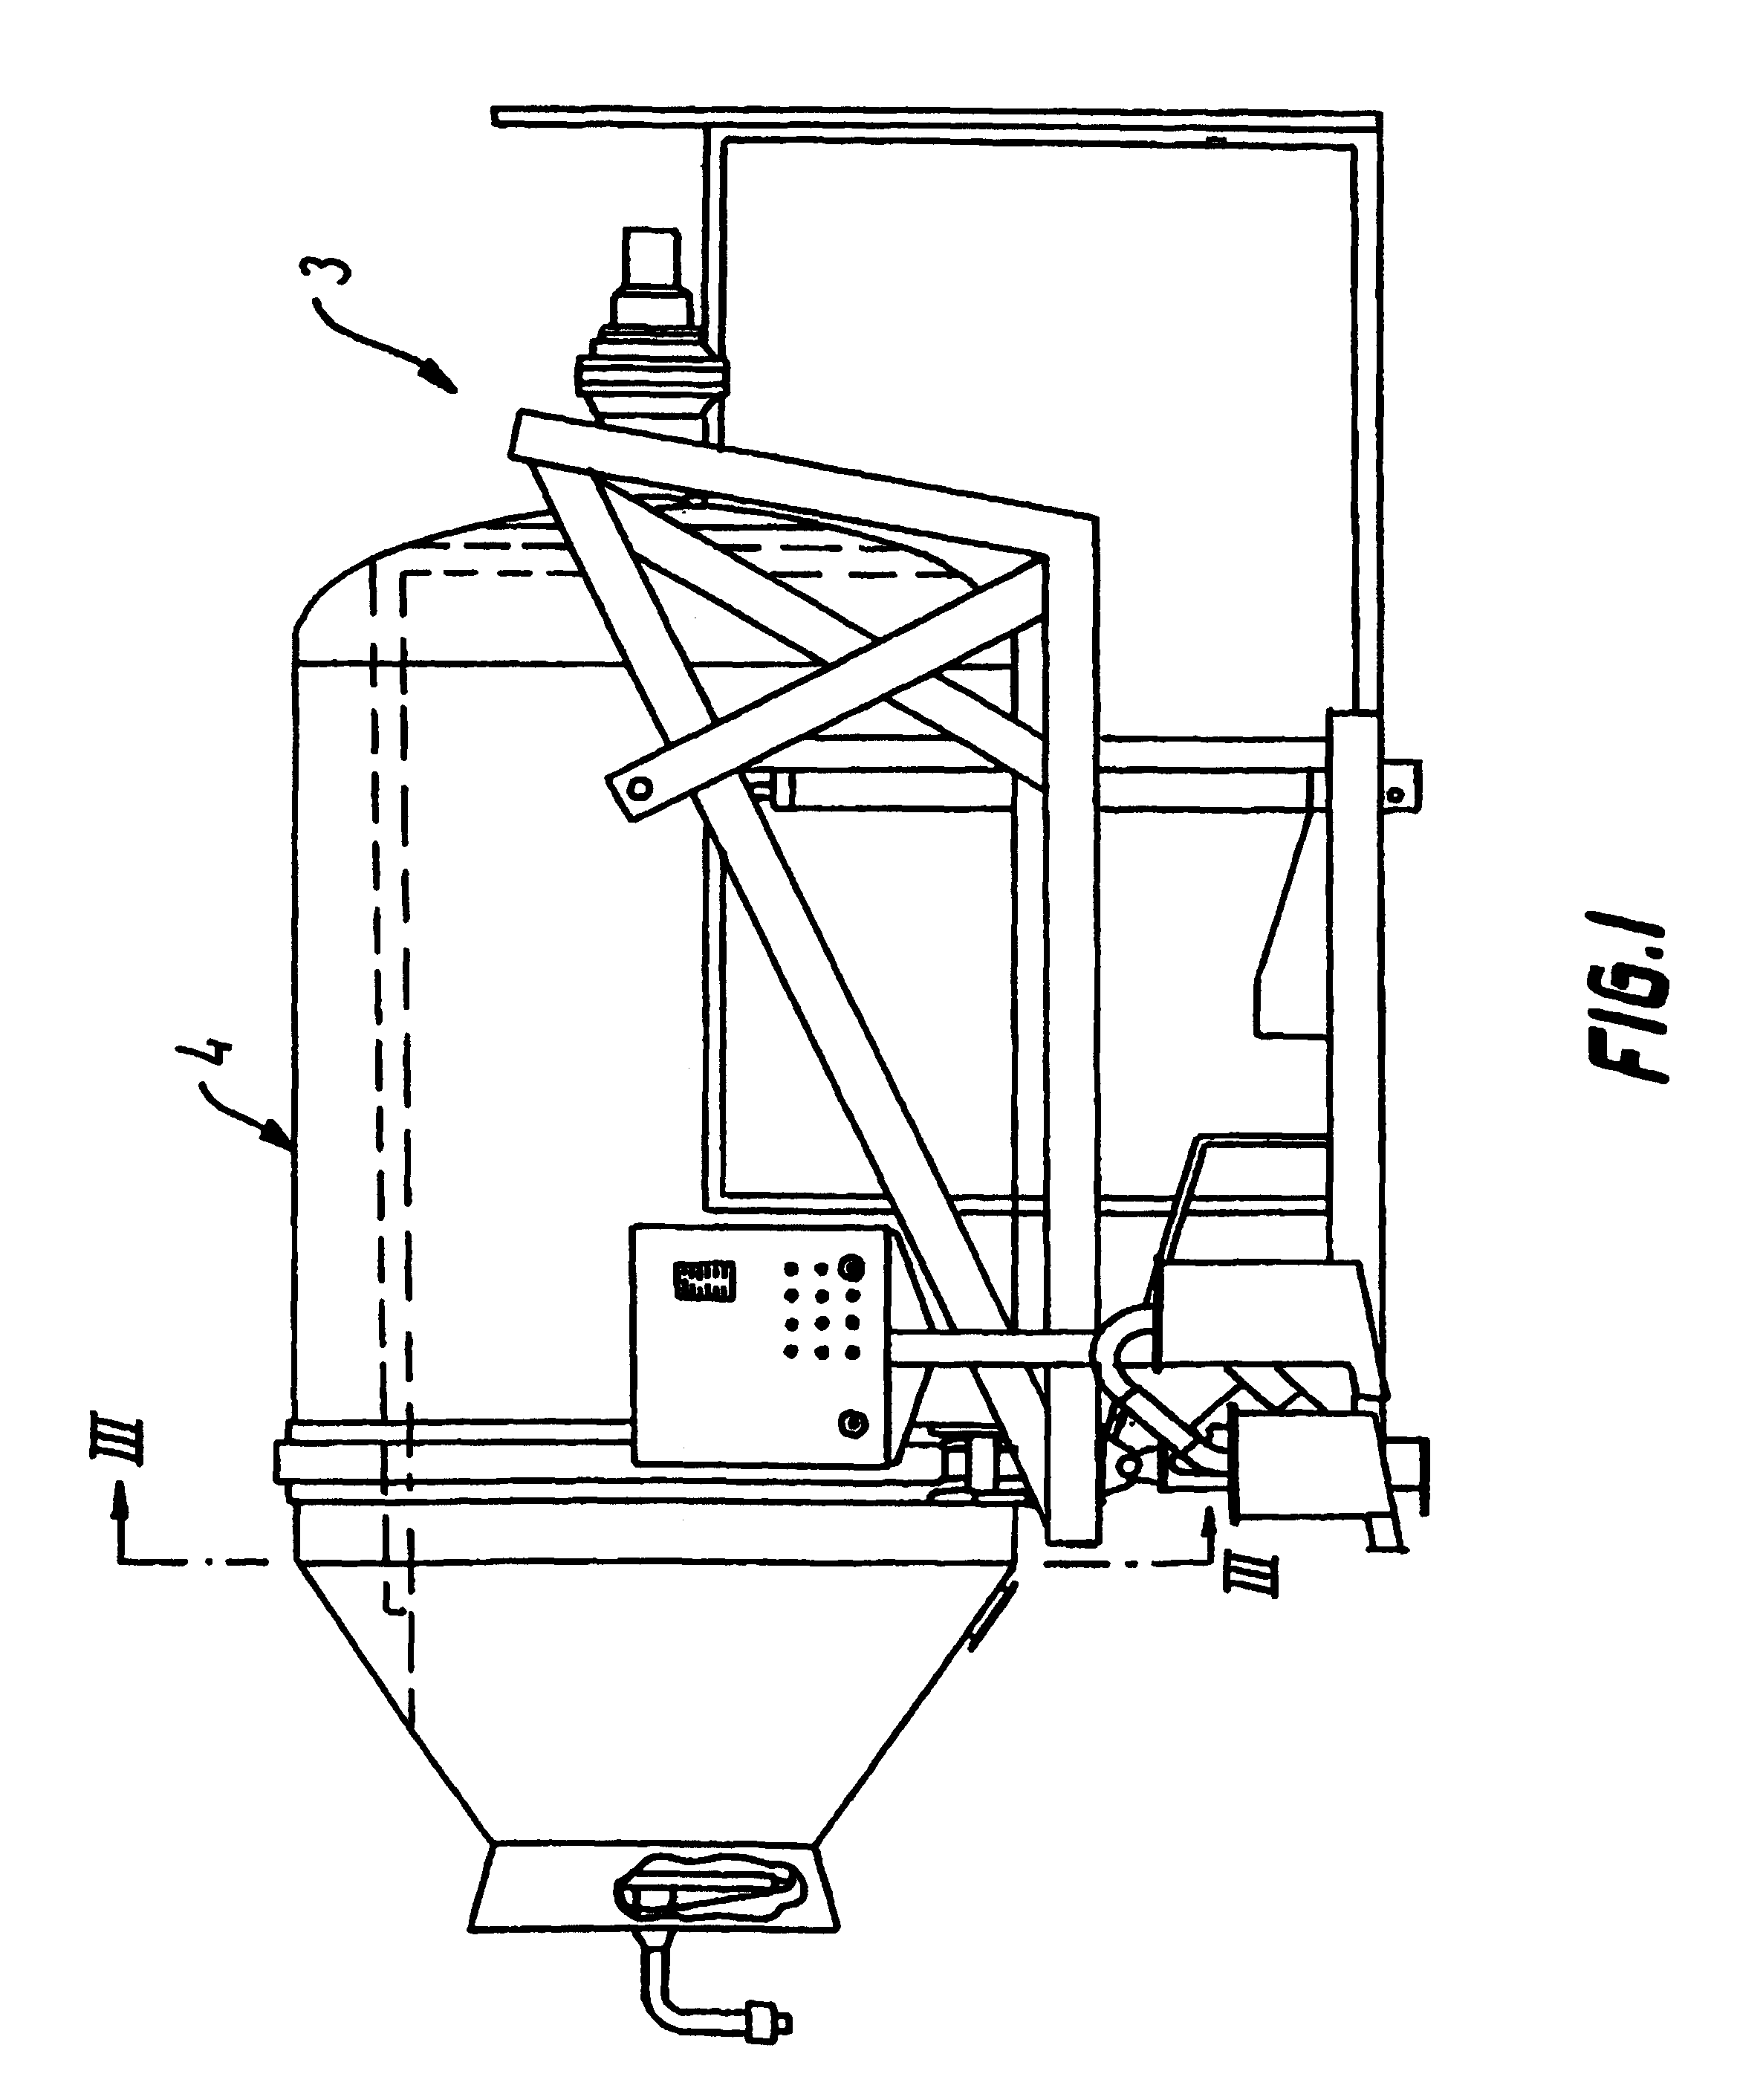 Method and means of thawing meat and use thereof